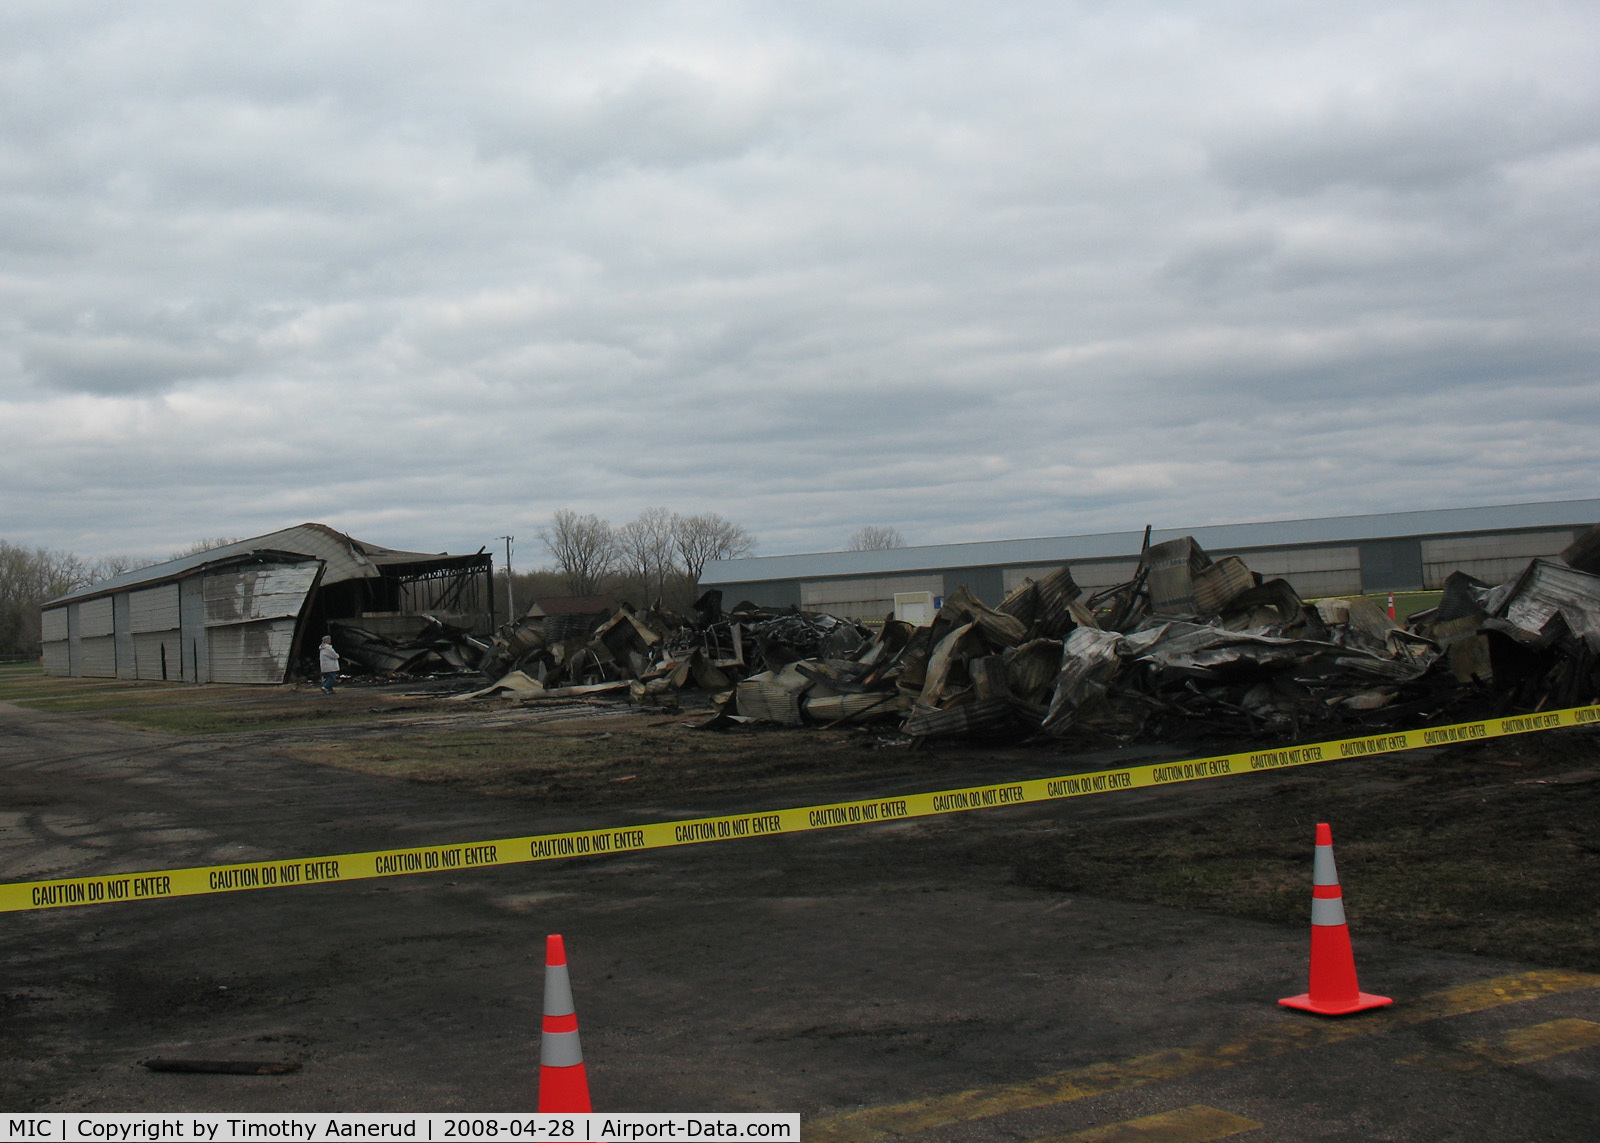 Crystal Airport (MIC) - Fire destroys a hangar on the north side of the airport on 27-Apr-2008